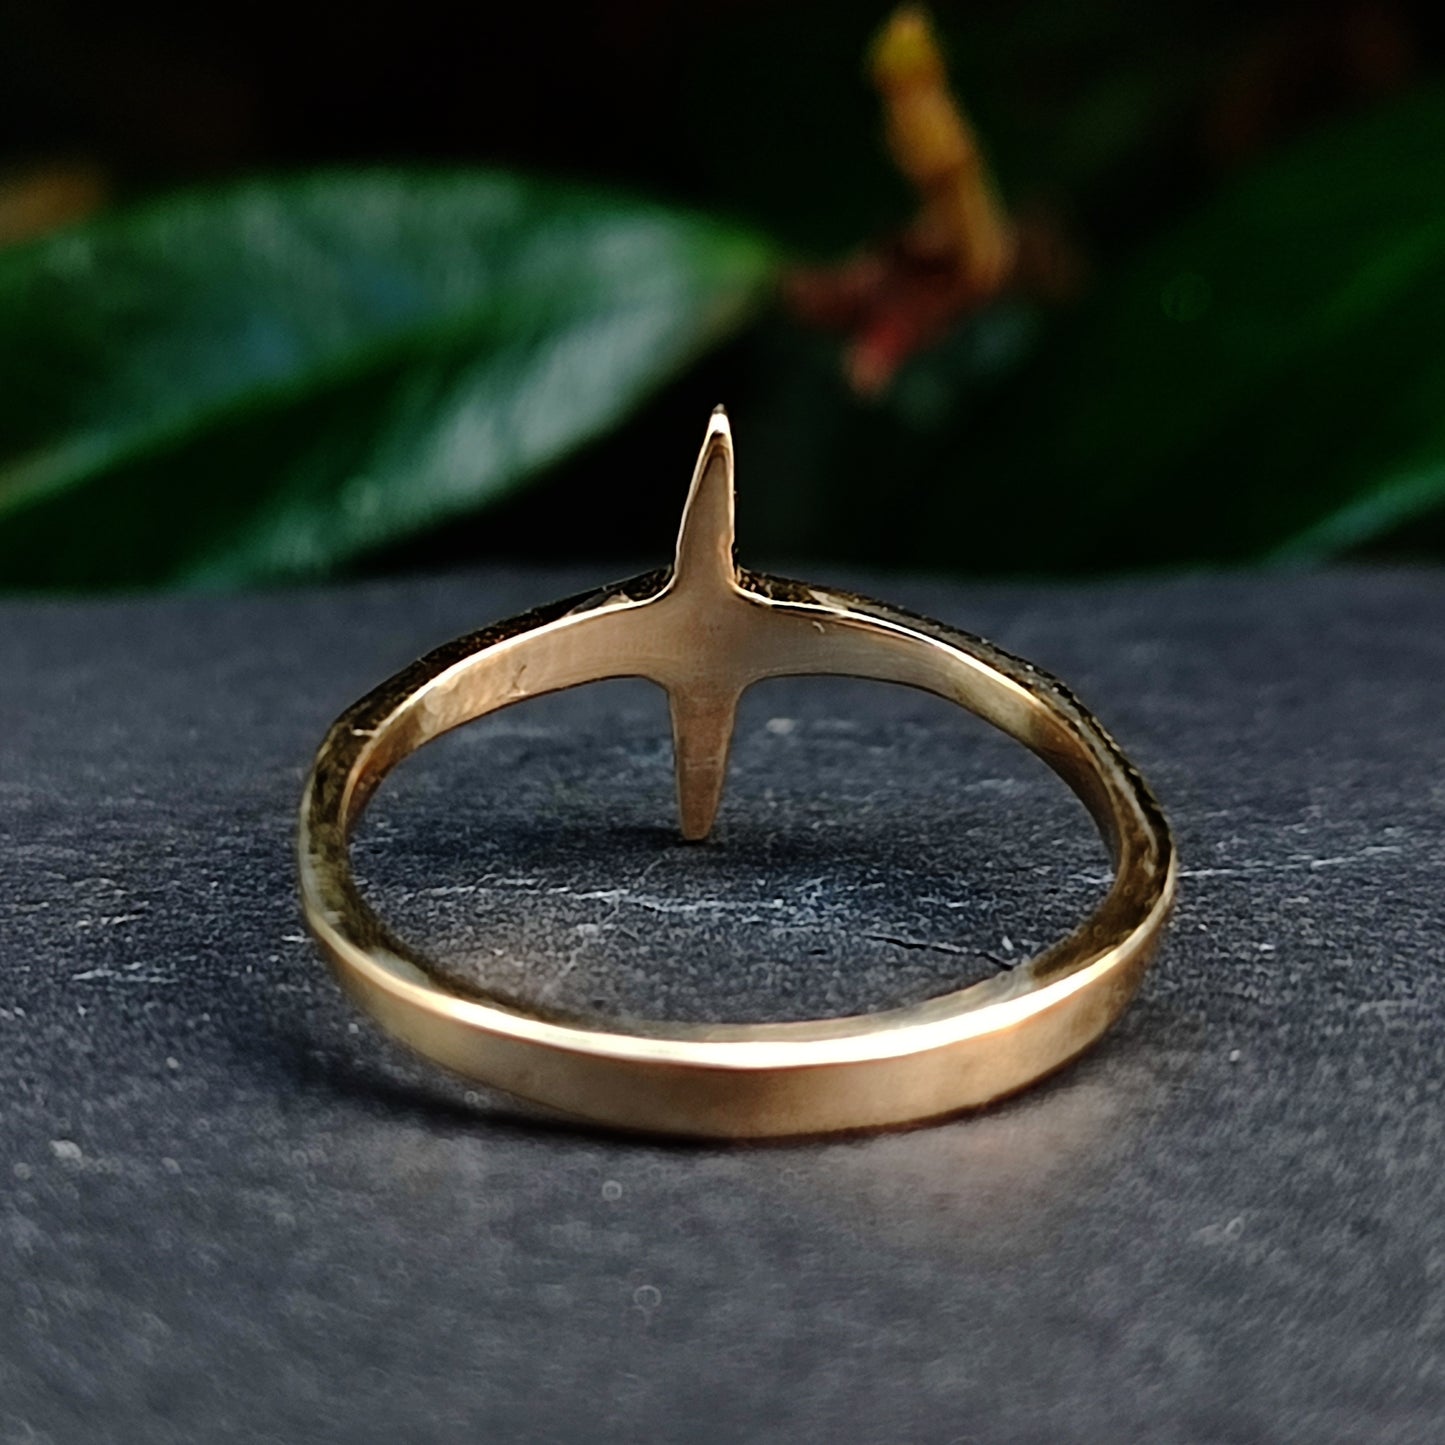 North Star Ring- 9ct Gold